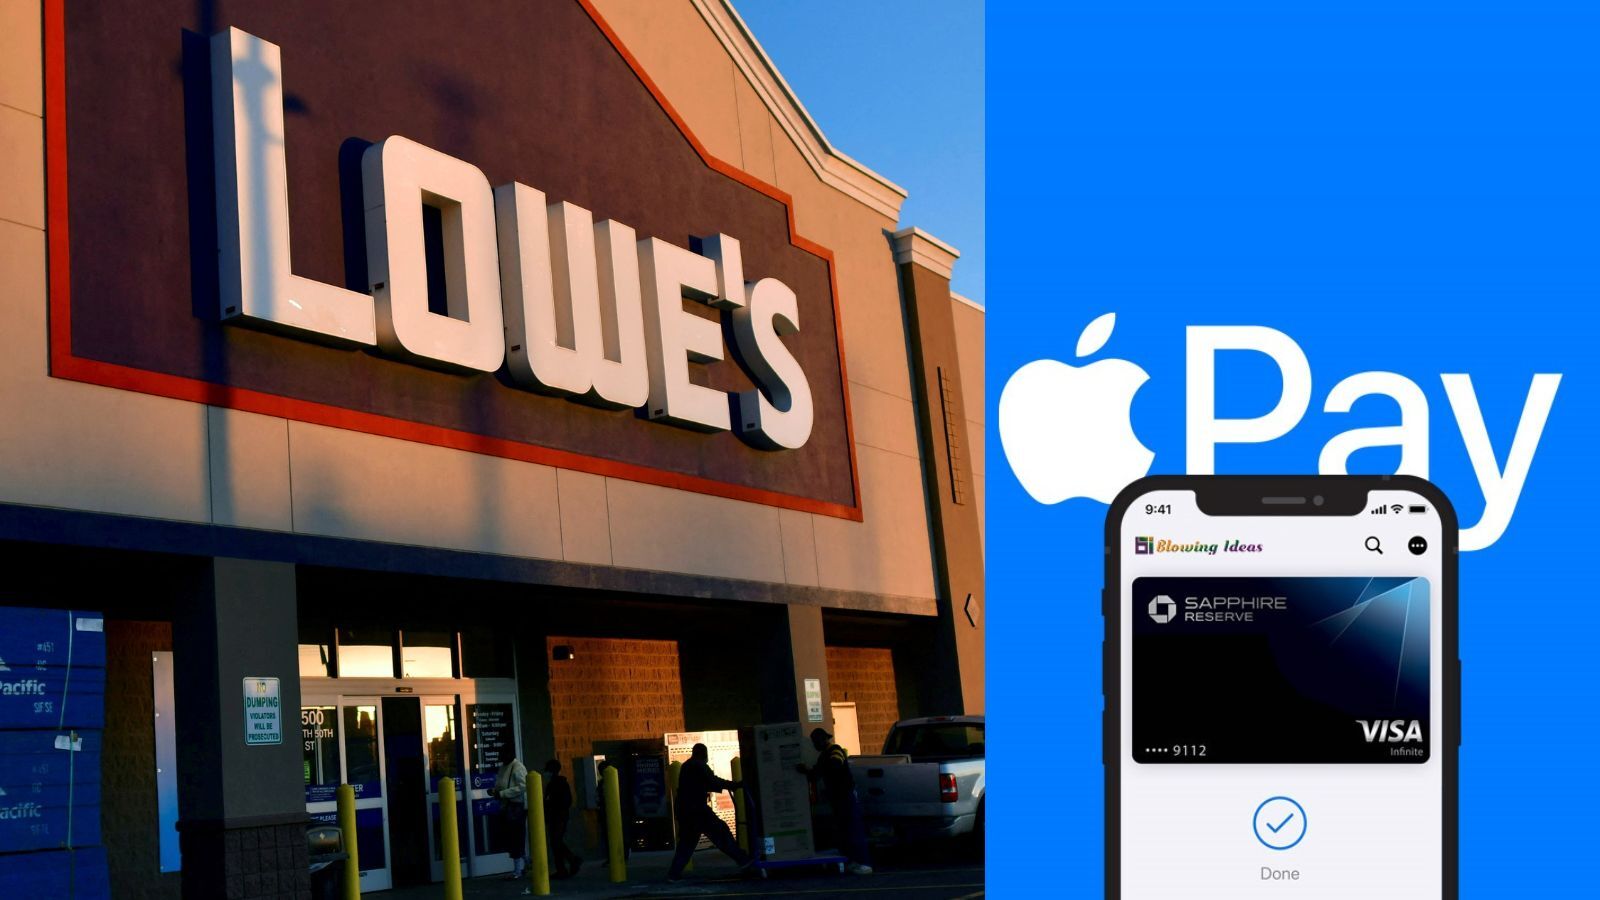 Does Lowe's Take Apple Pay? (The Latest News)